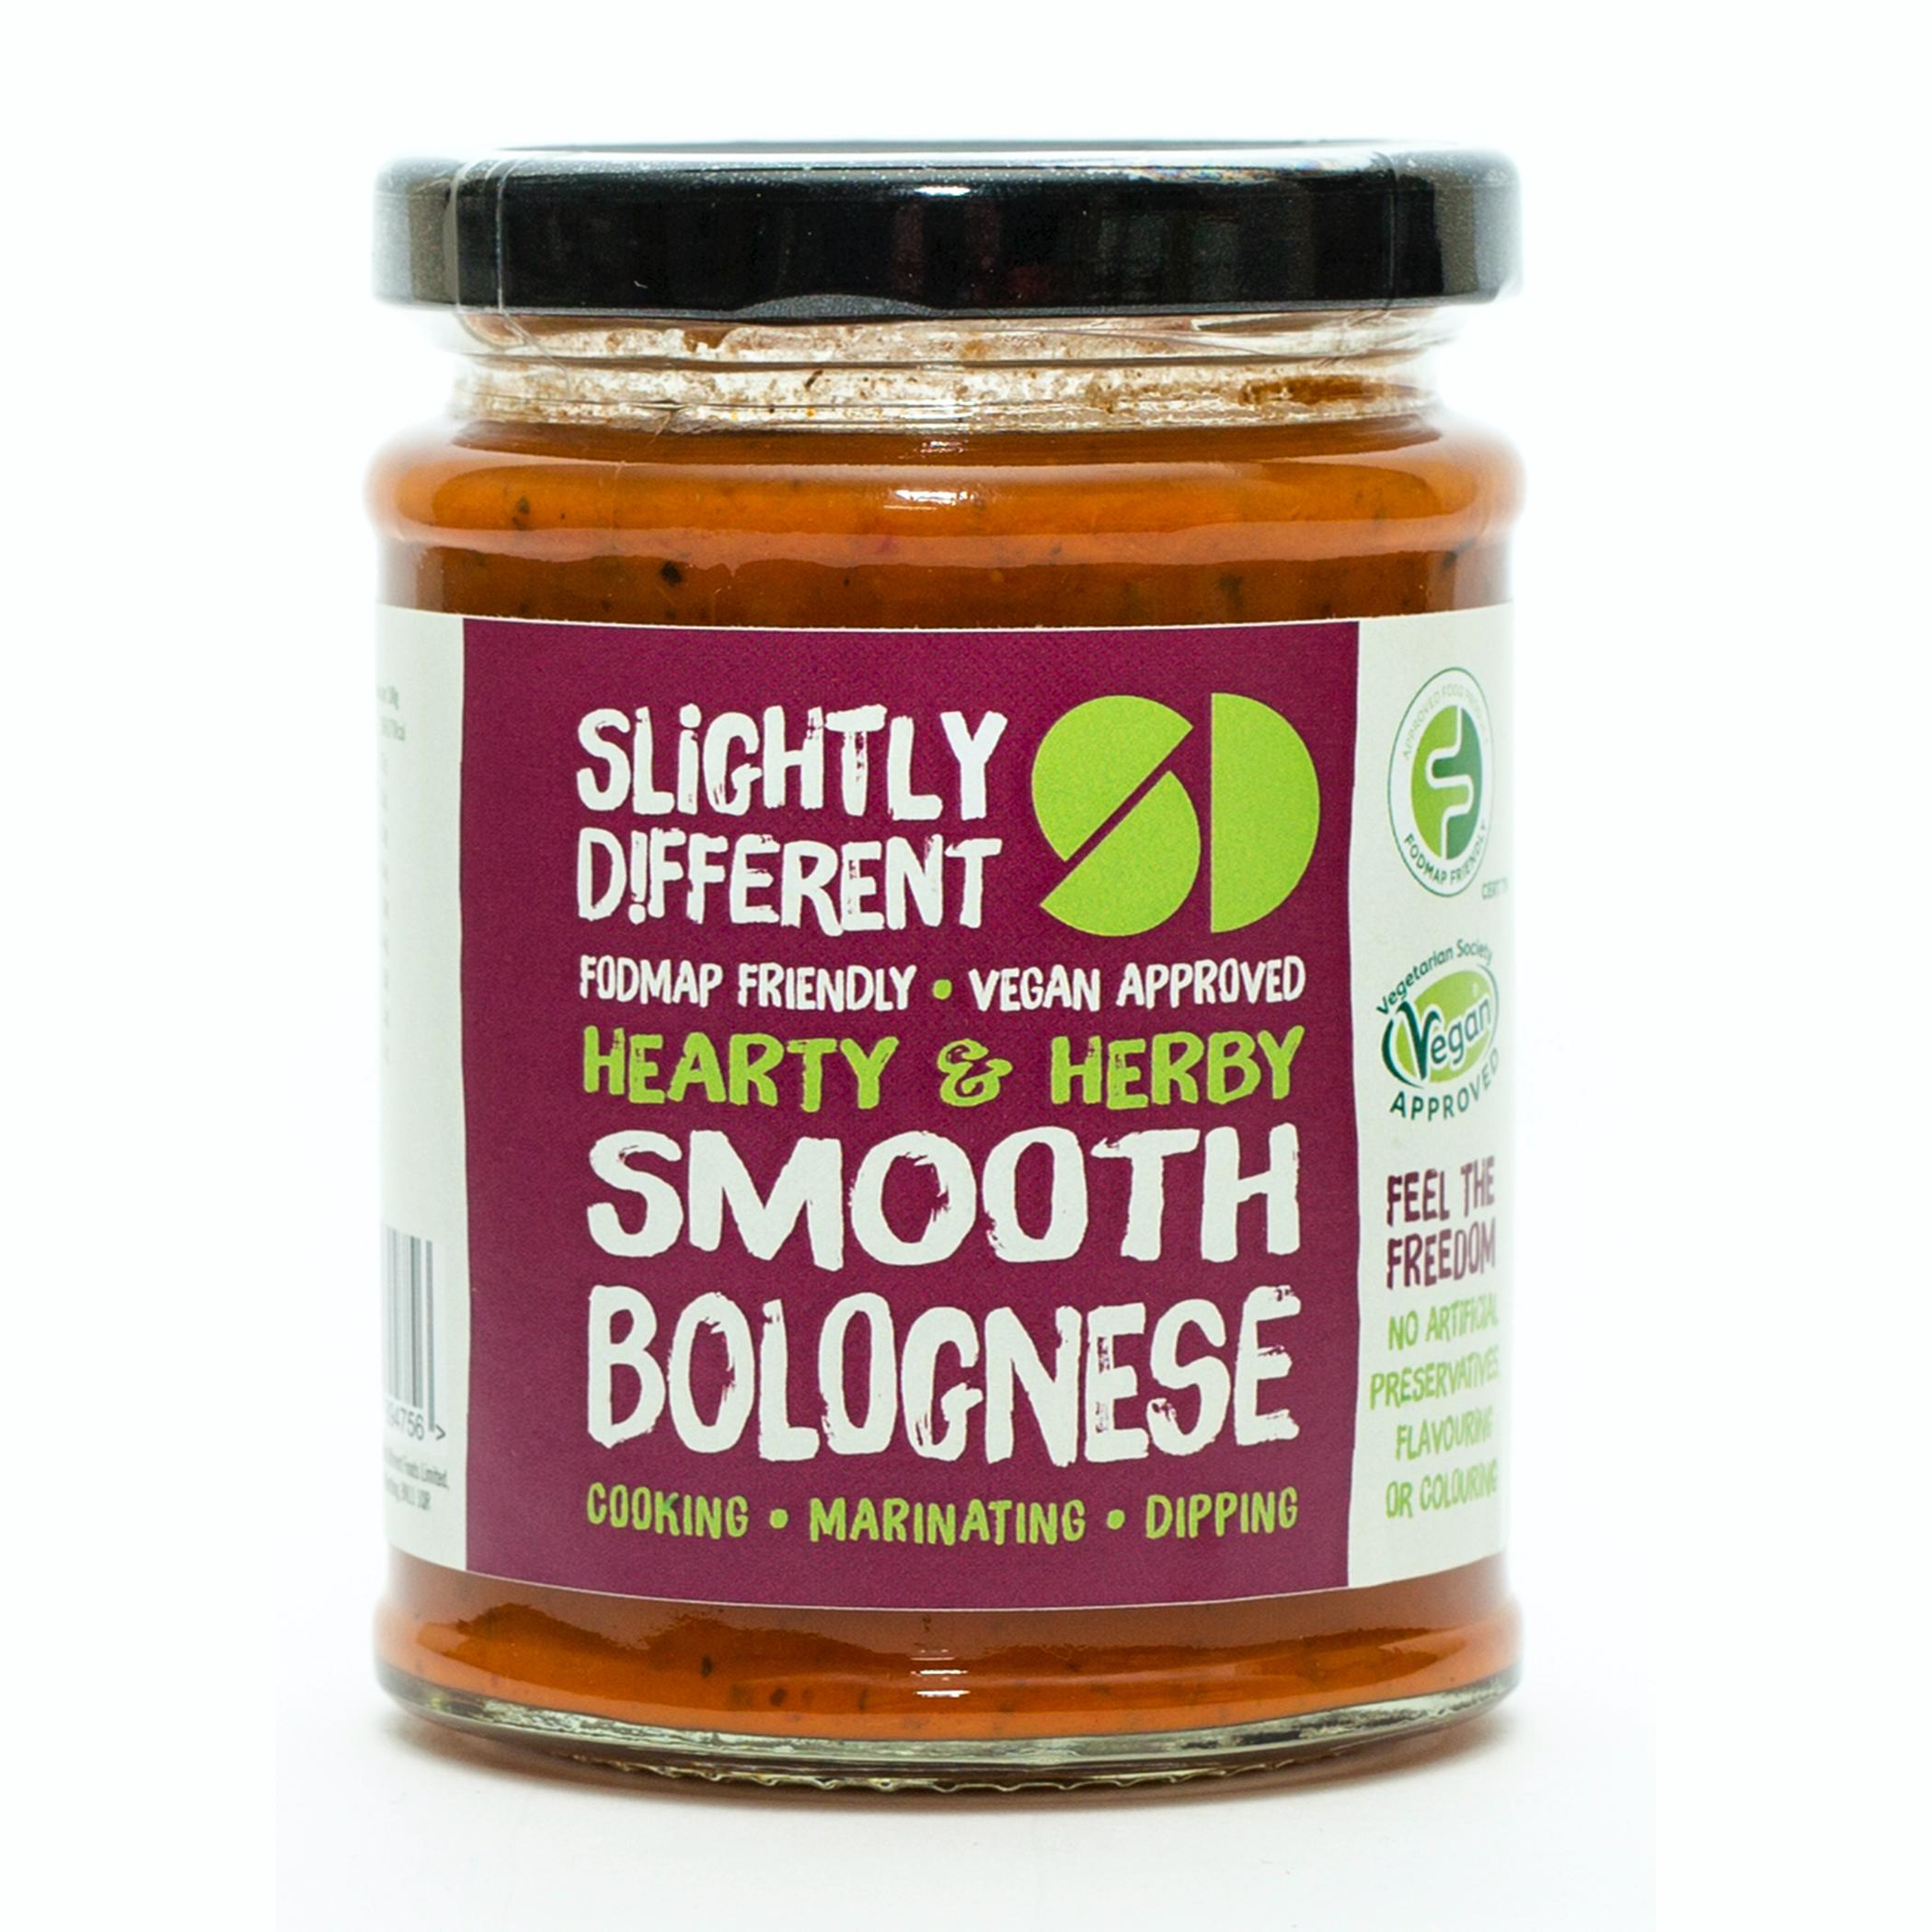 A jar of Slightly Different's Smooth Bolognese Sauce